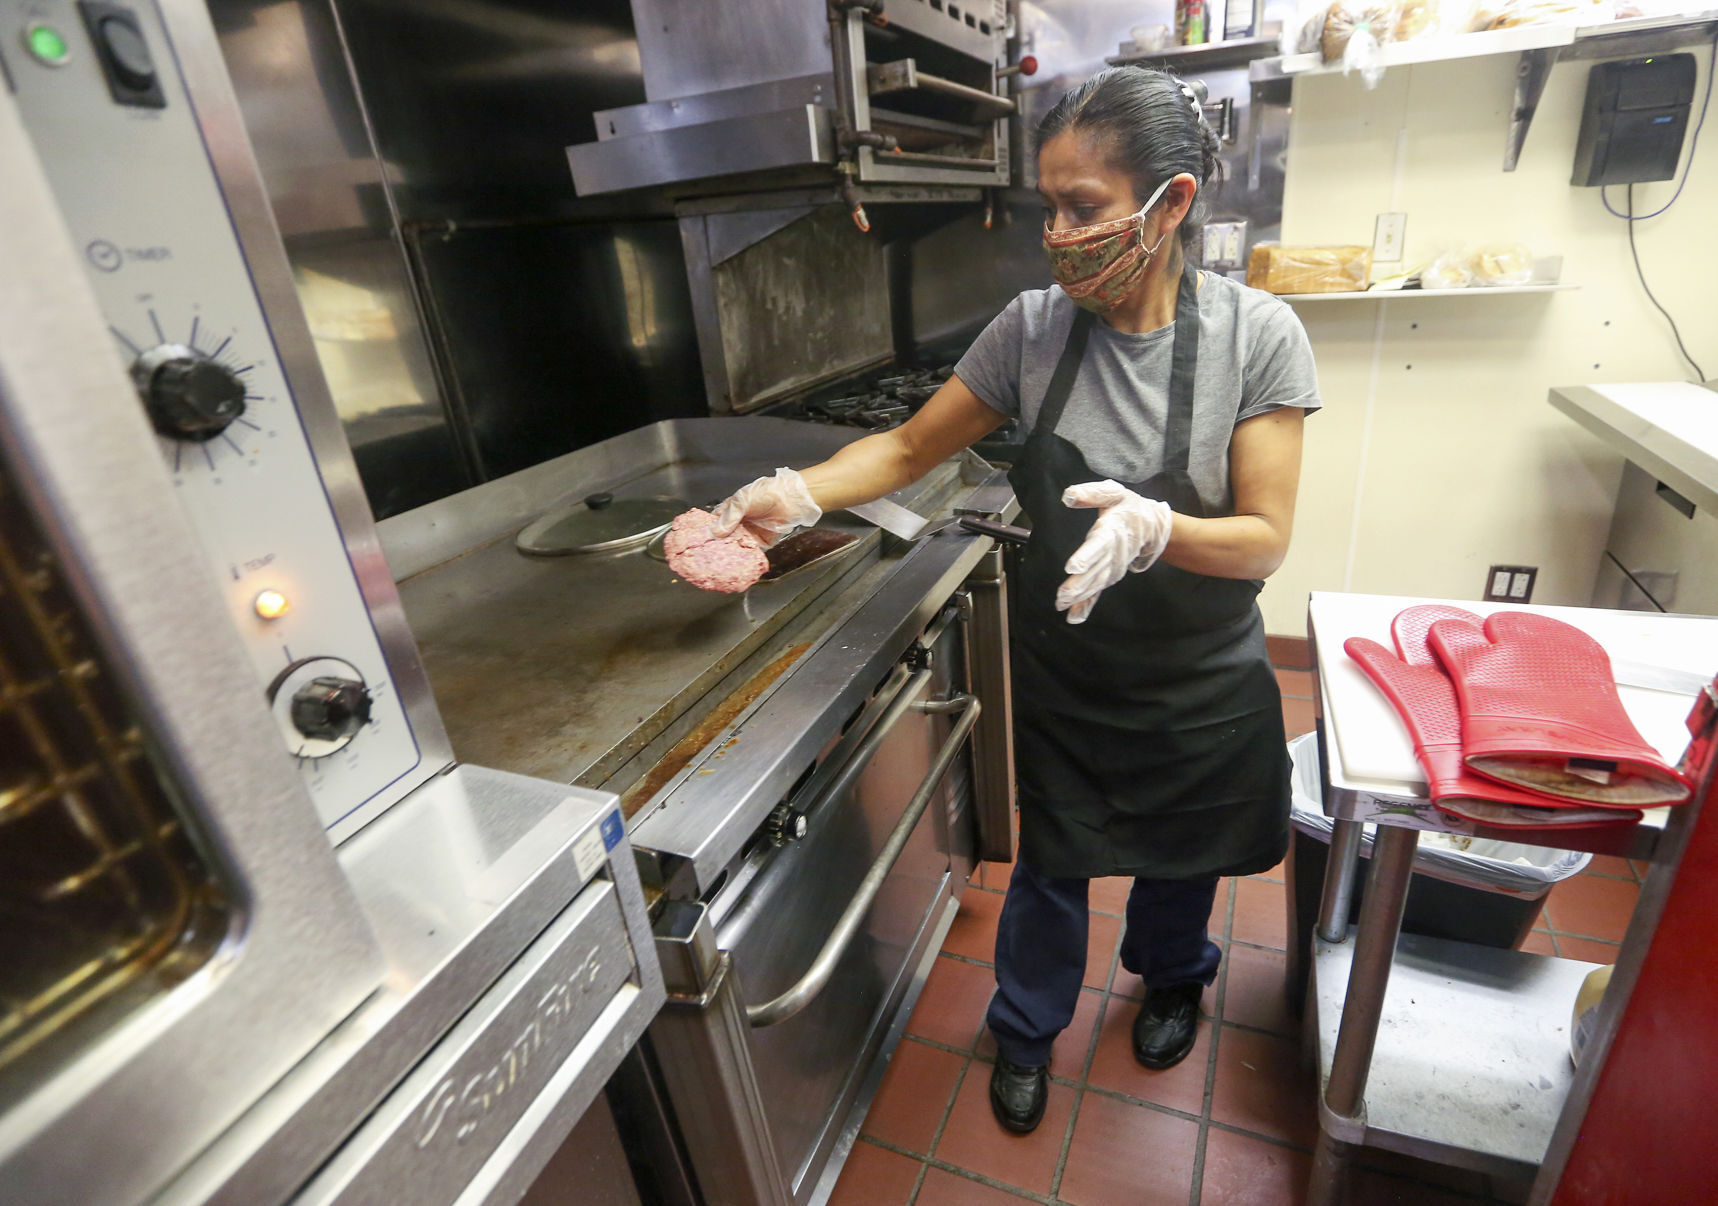 Celia Berez prepares food at Frentress Lake Bar & Grill in East Dubuque, Ill., on Thursday, July 16, 2020. PHOTO CREDIT: NICKI KOHL